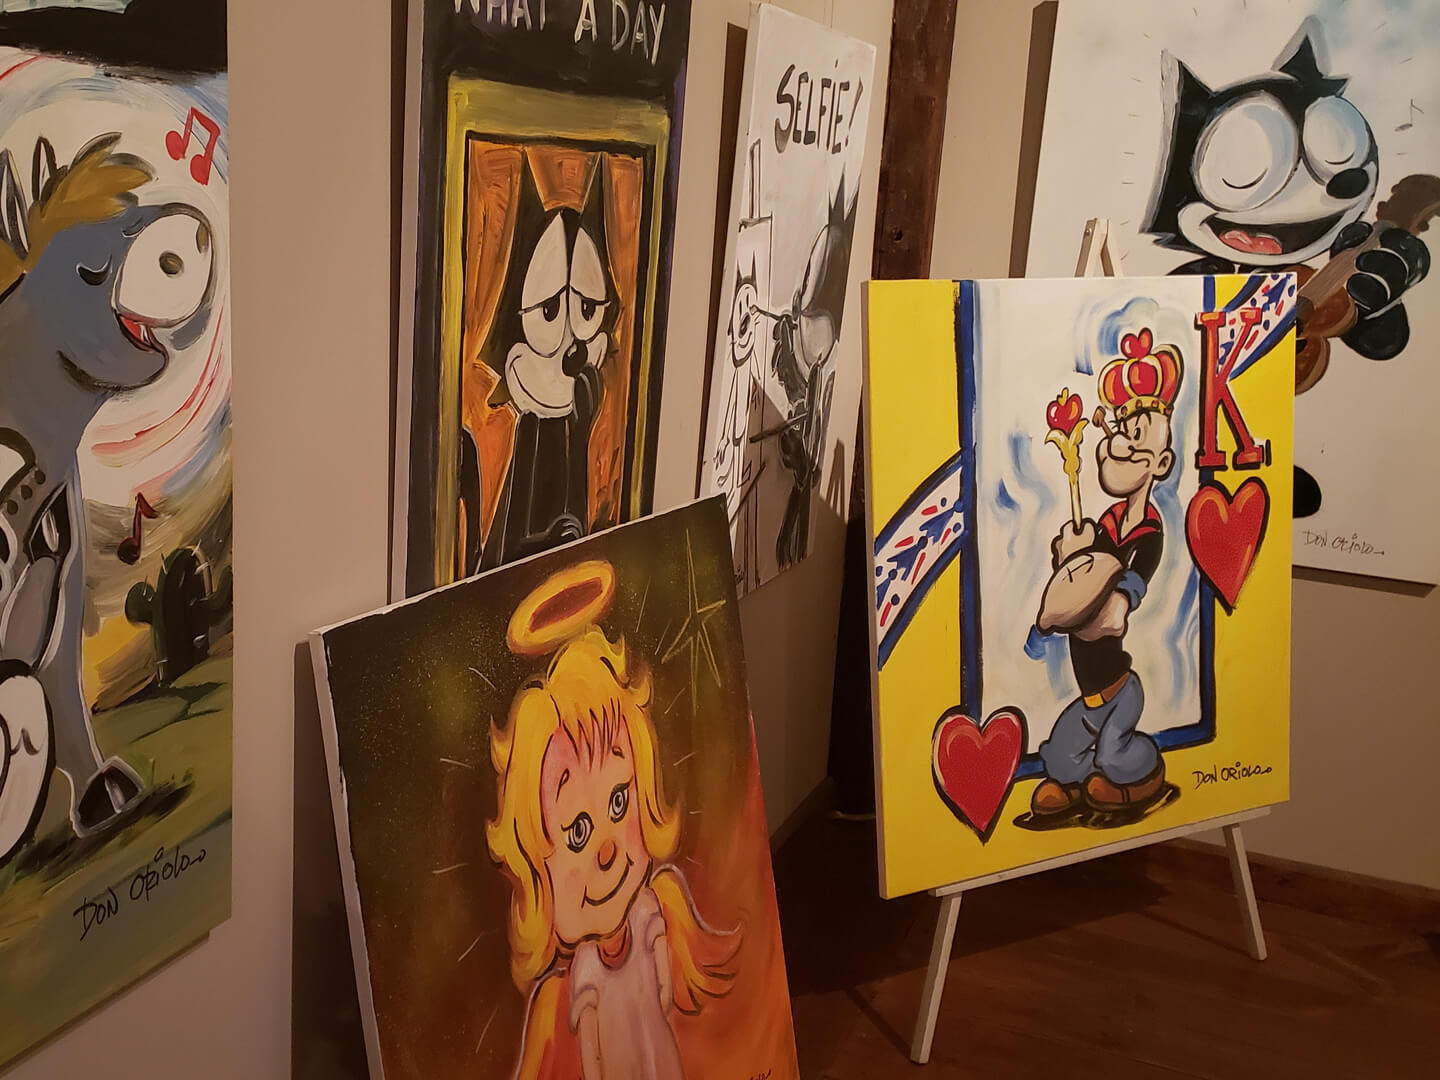 A wall full of paintings of Felix the Cat, Popeye, and an angel